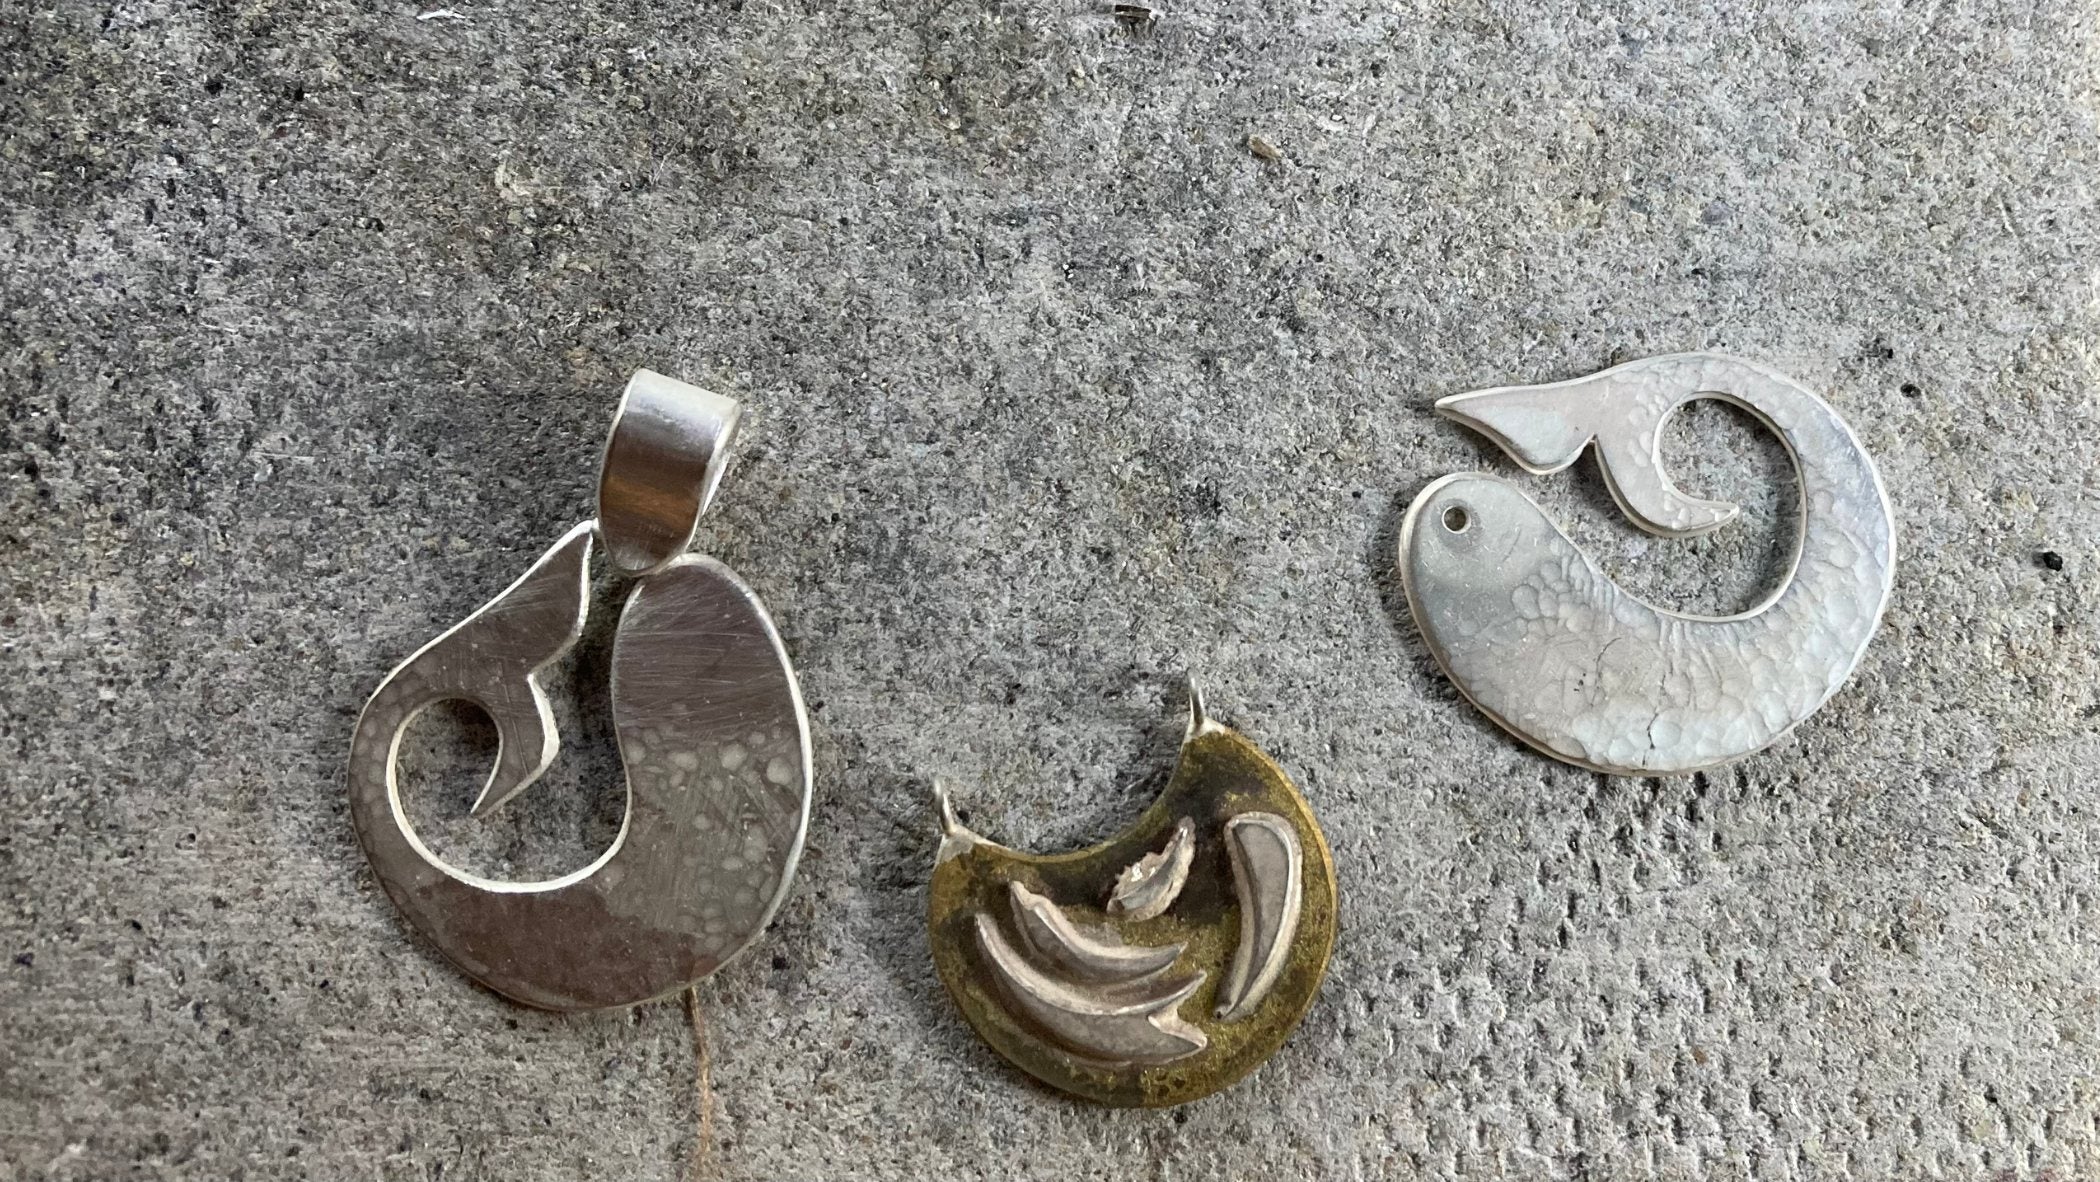 2 half-finished sterling silver fish pendants, on a heat-proof tile, with a brass and silver 'firework' necklace pendant in the middle